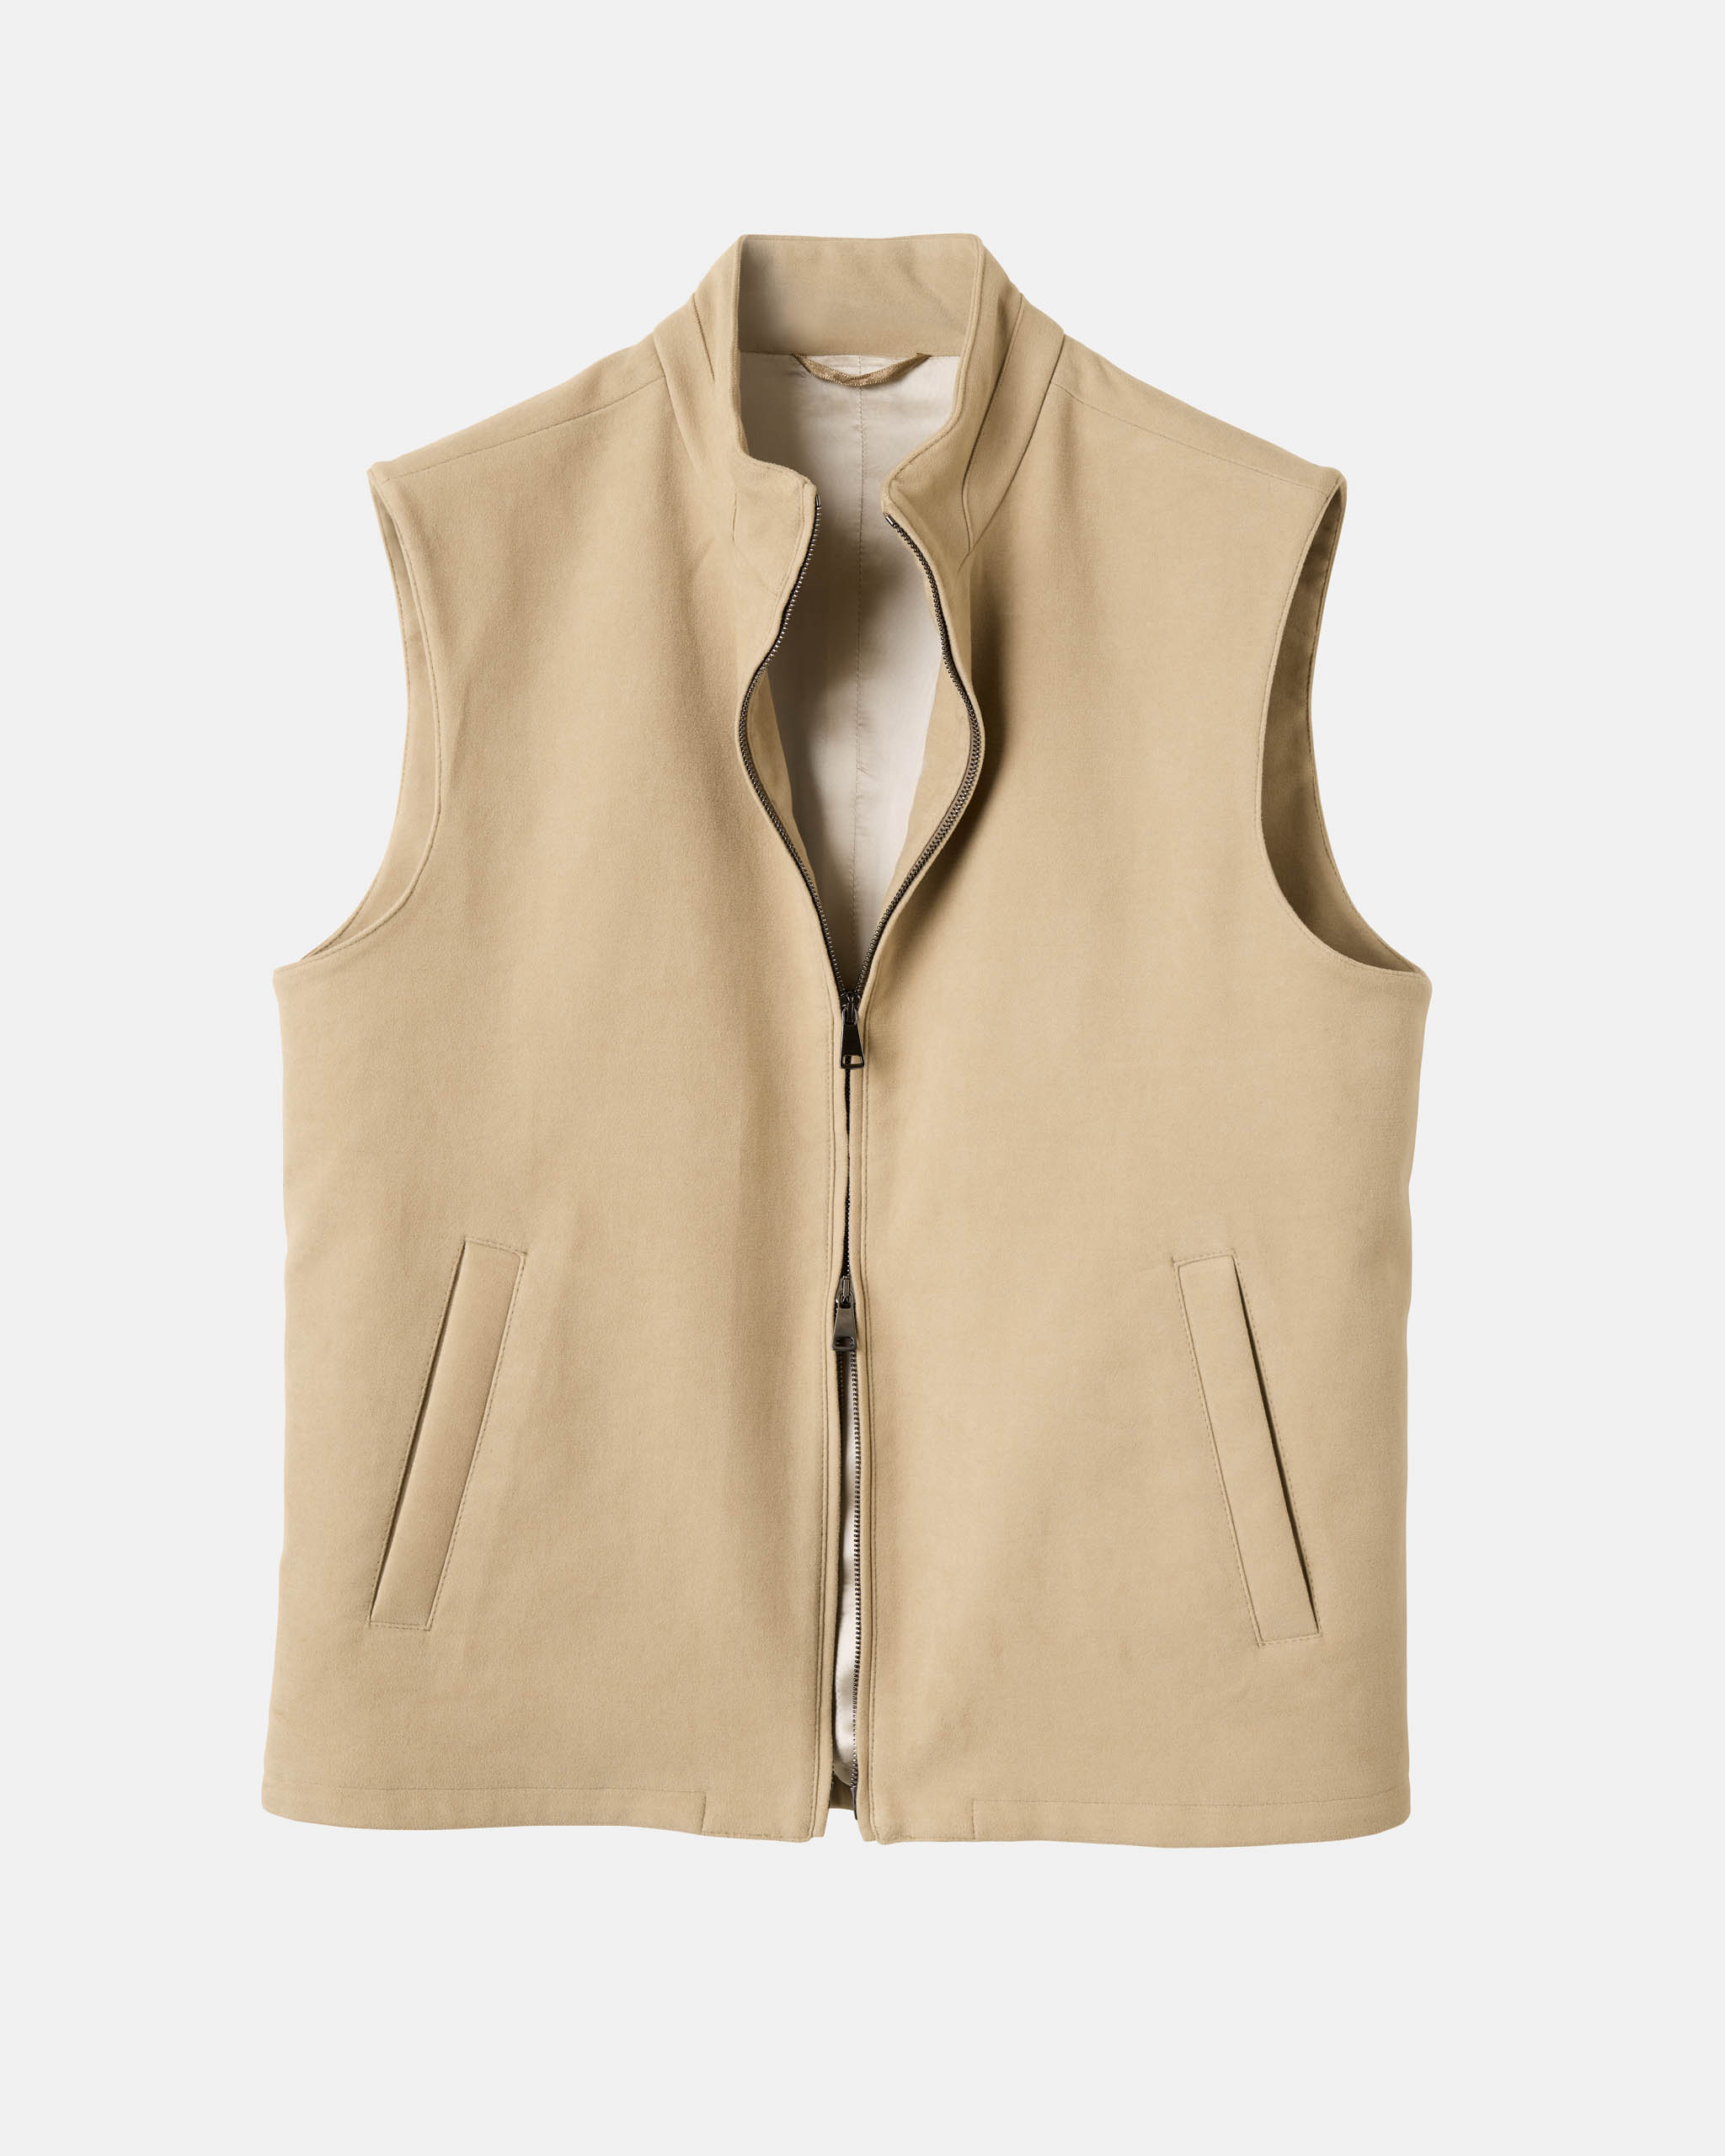 The Winemakers vest Chateau beige image 1